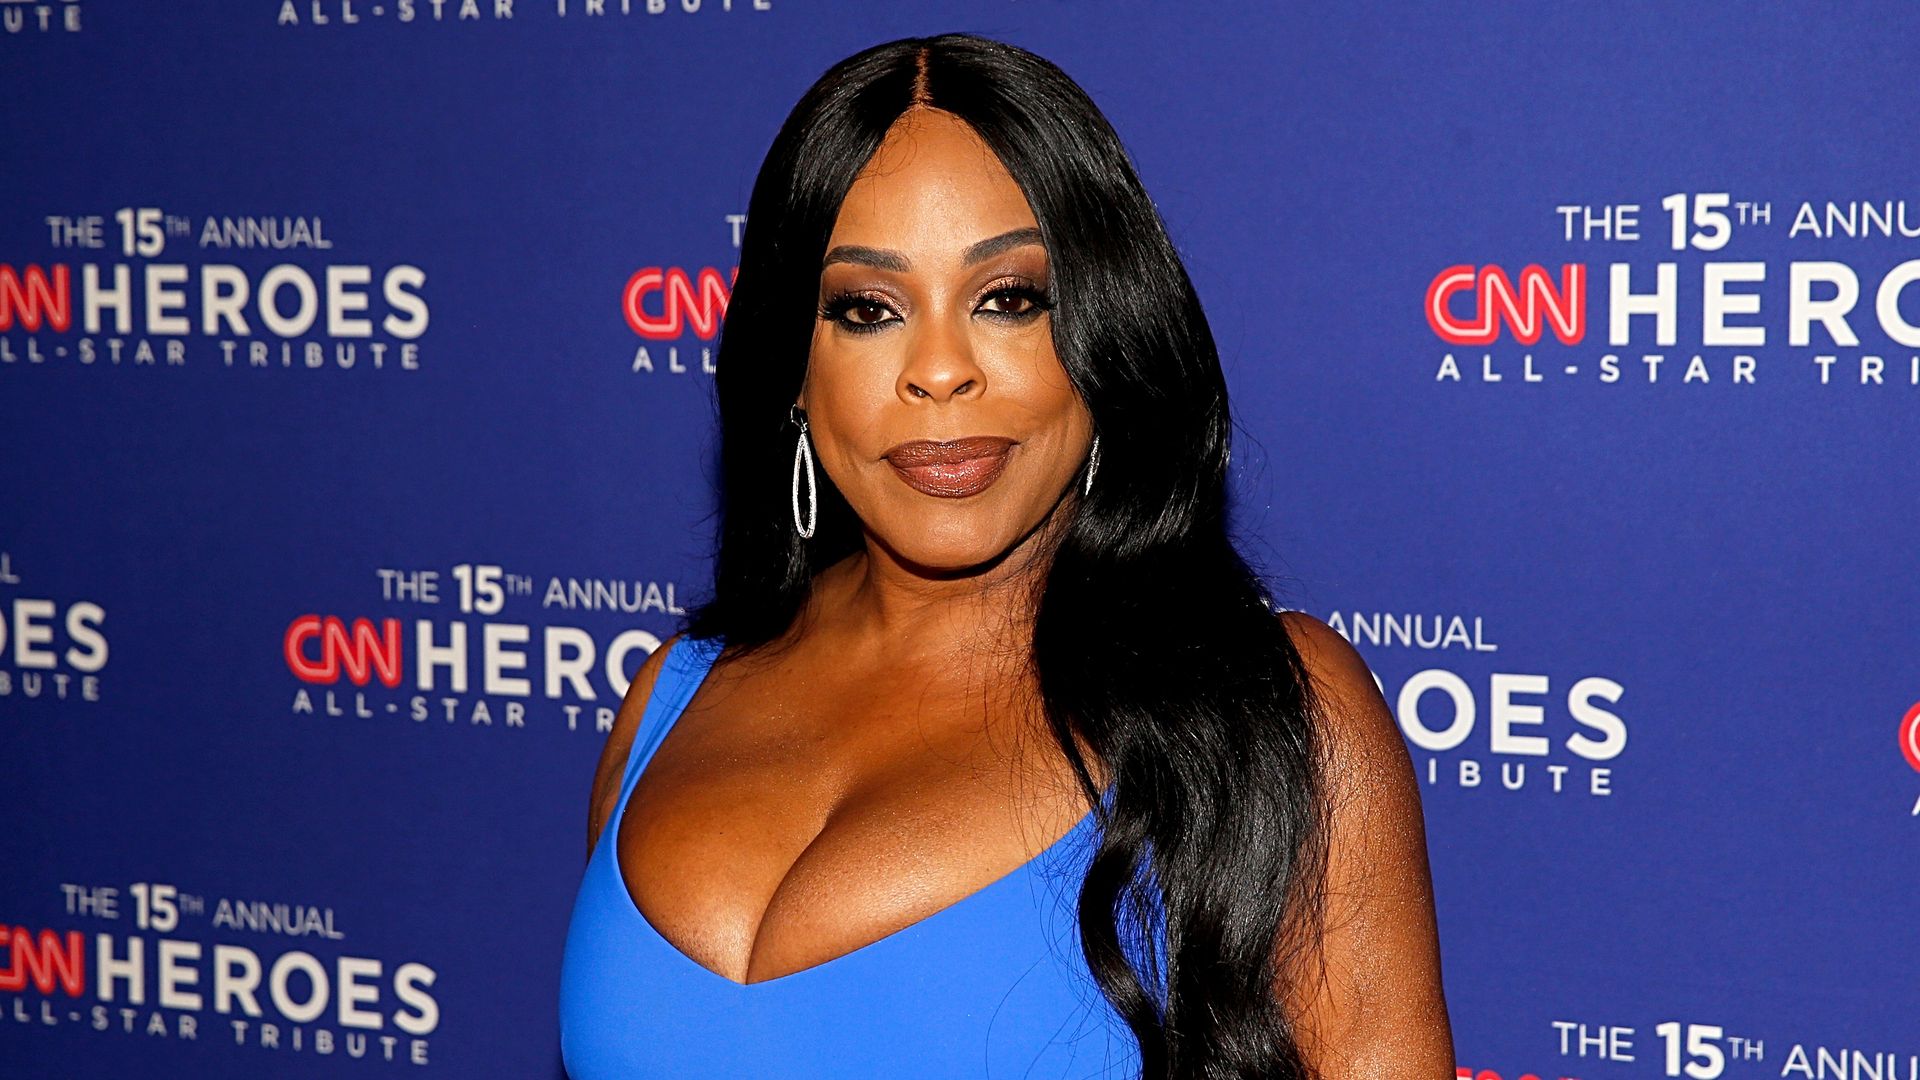 Niecy Nash at the 15th Annual CNN Heroes all-star tribute